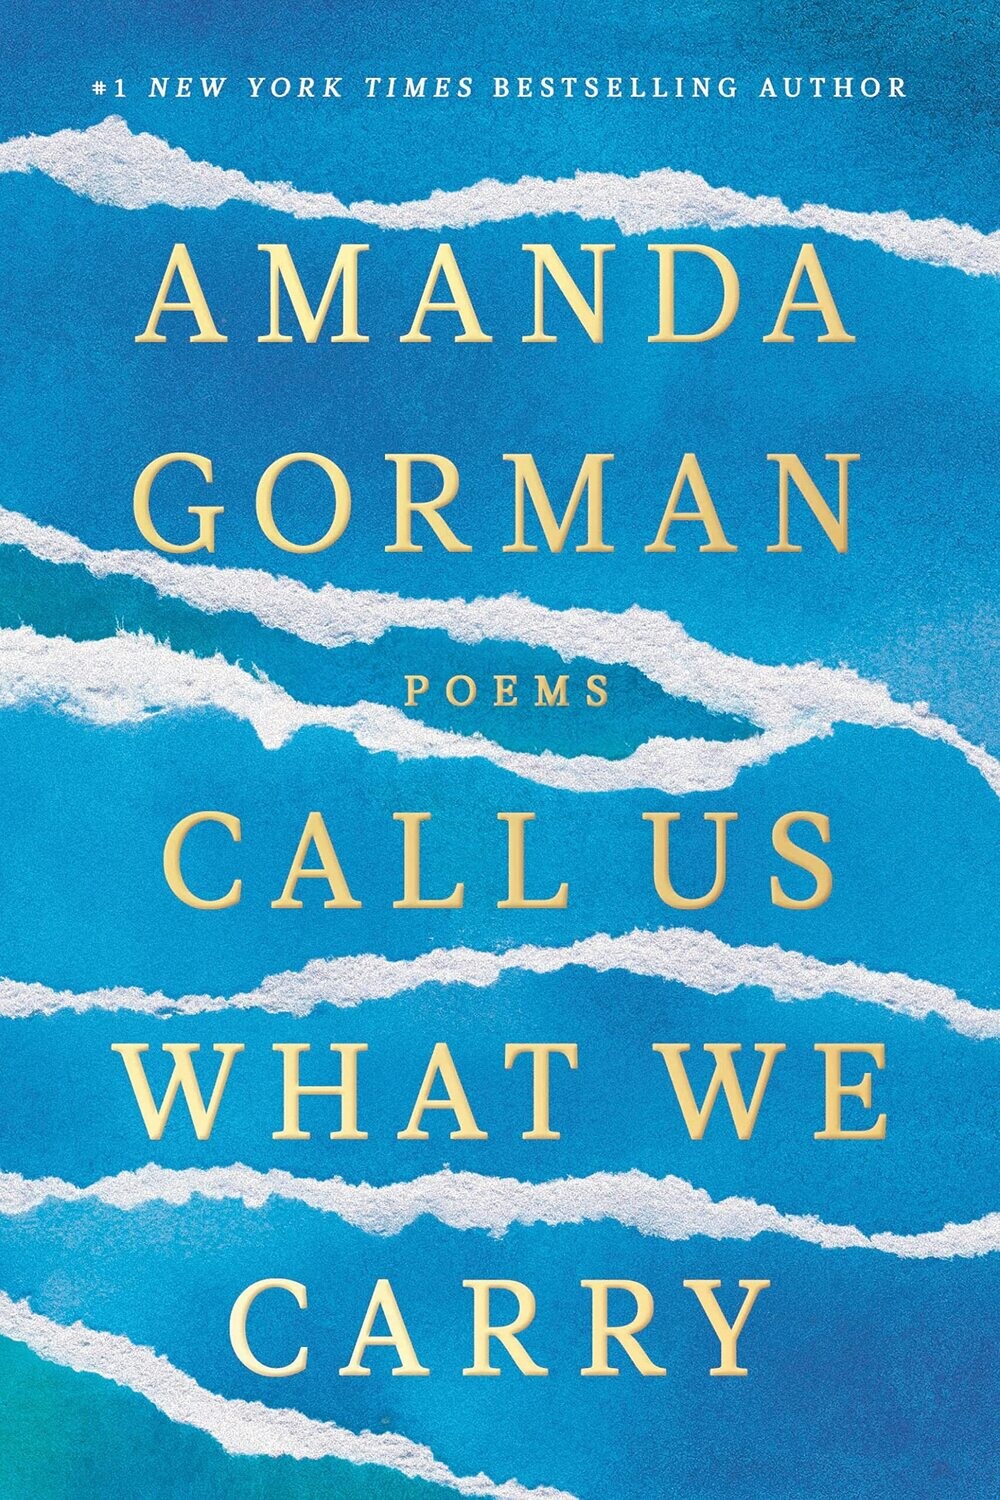 Call Us What We Carry: Poems (Hardcover) – by Amanda Gorman